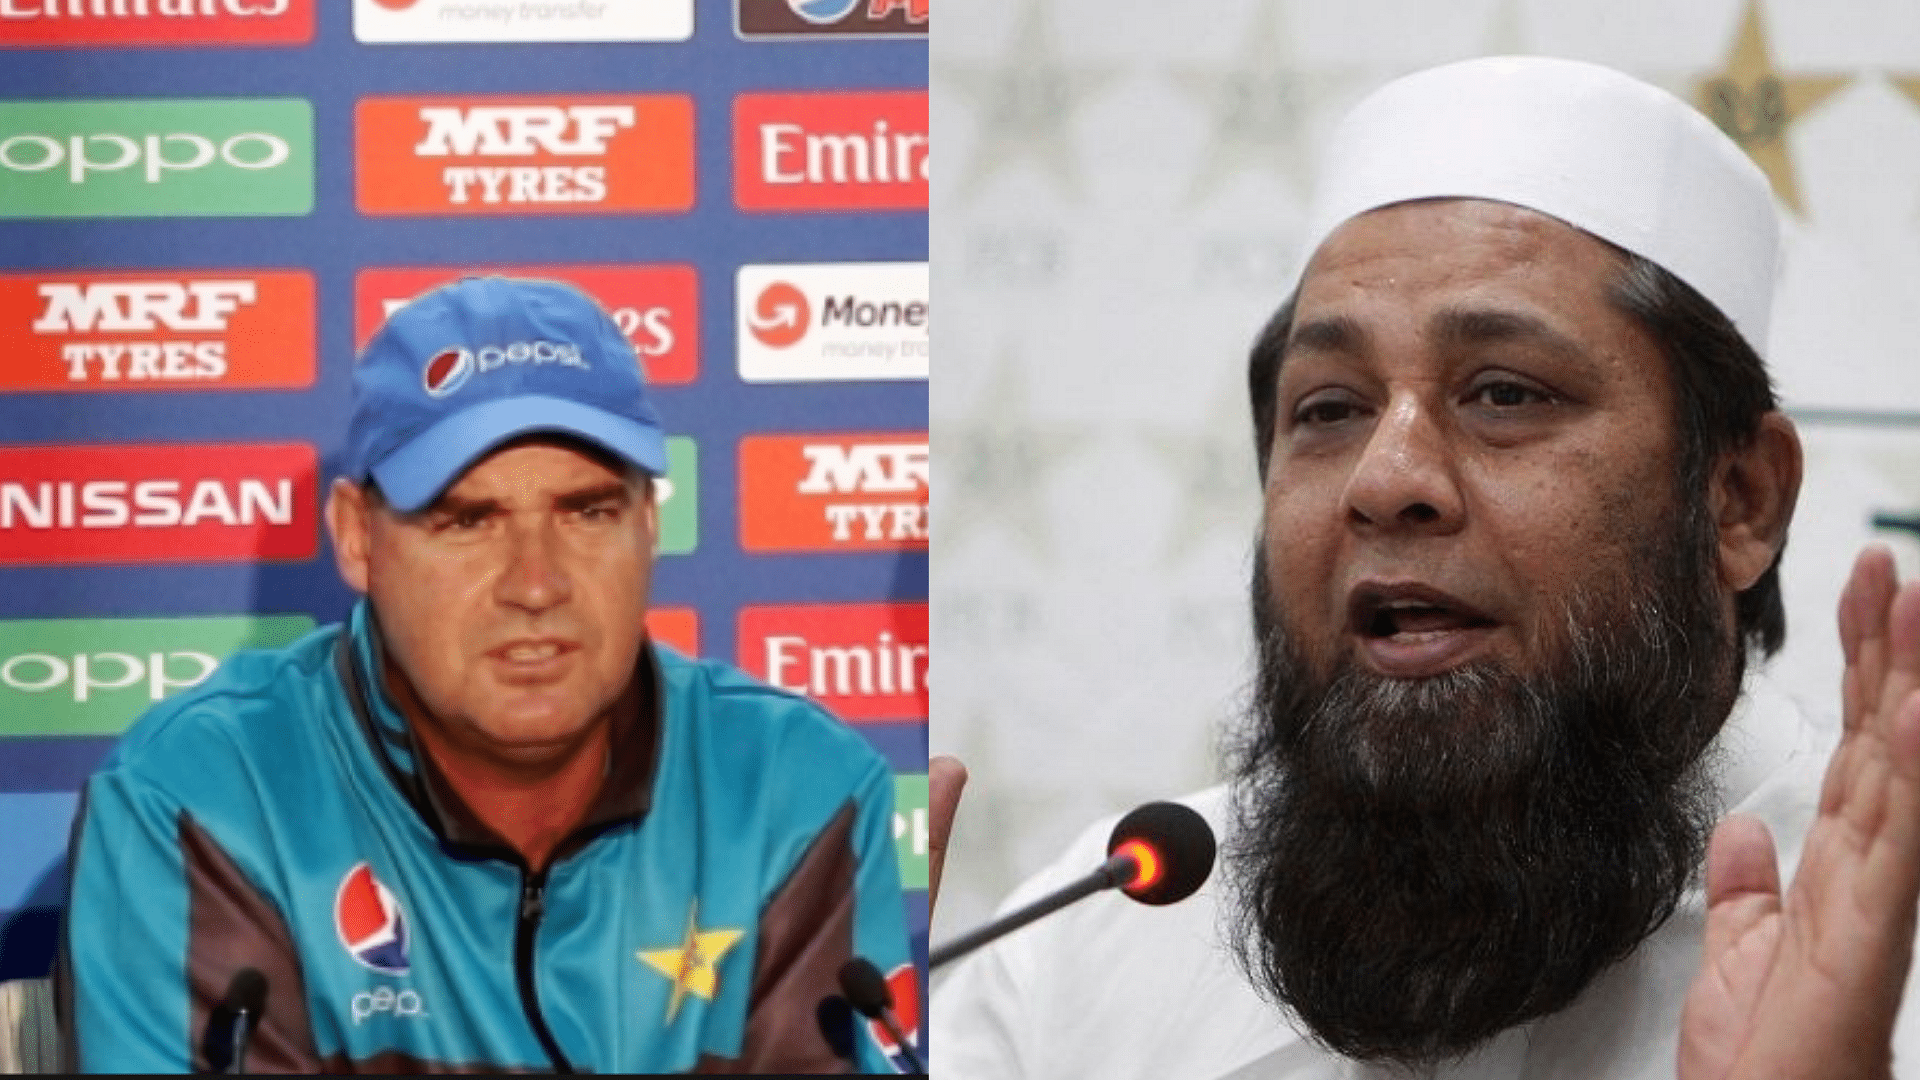 PCB has decided not to renew contracts of Pakistan coach Mickey Arthur and Chief Selector Inzamam-ul-Haq